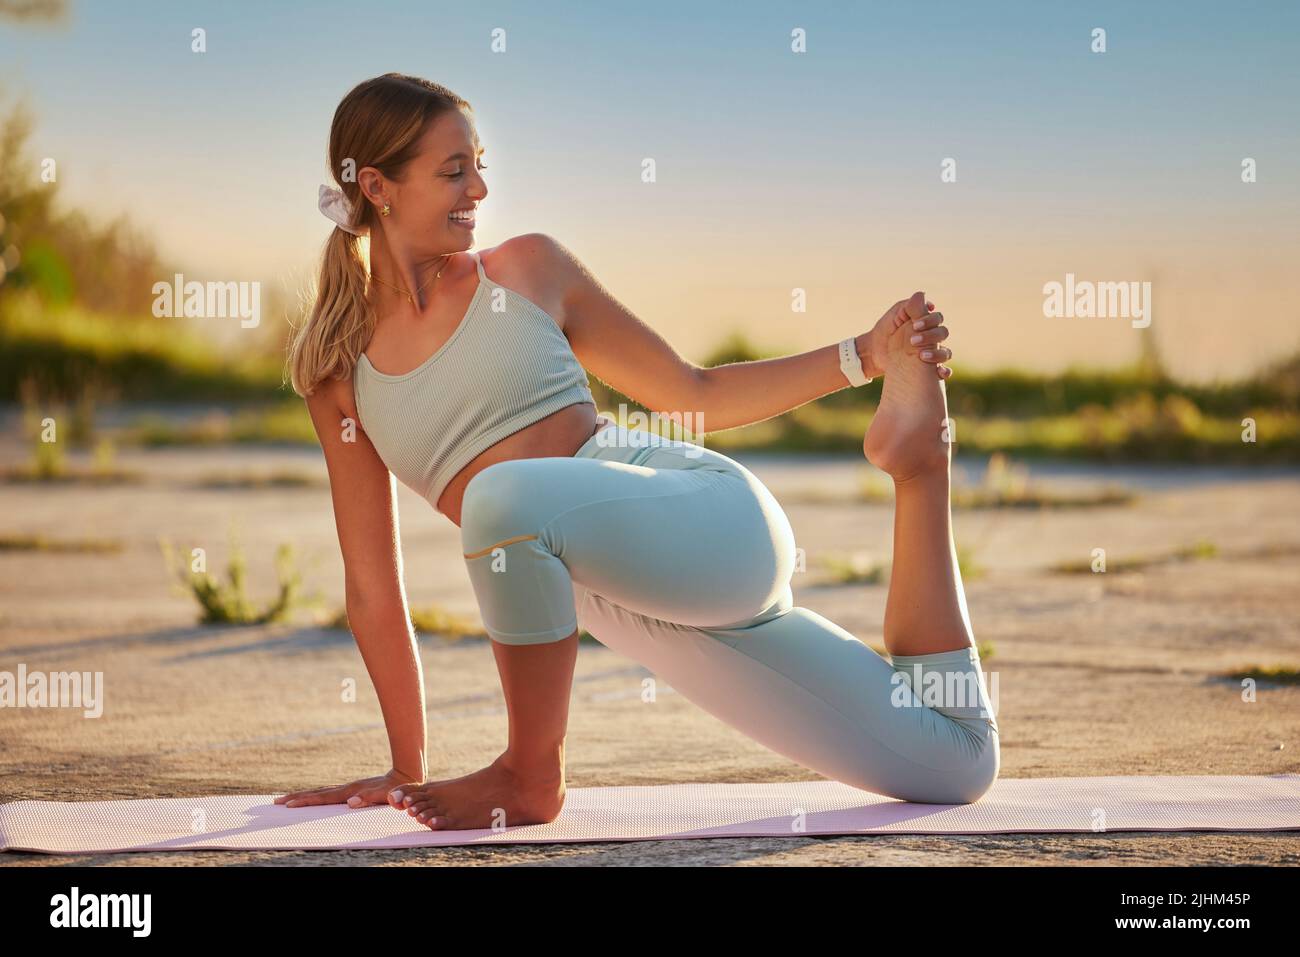 Full length yoga woman holding twisted lizard pose in outdoor practice in remote nature. Smiling beautiful caucasian person using mat, balancing while Stock Photo